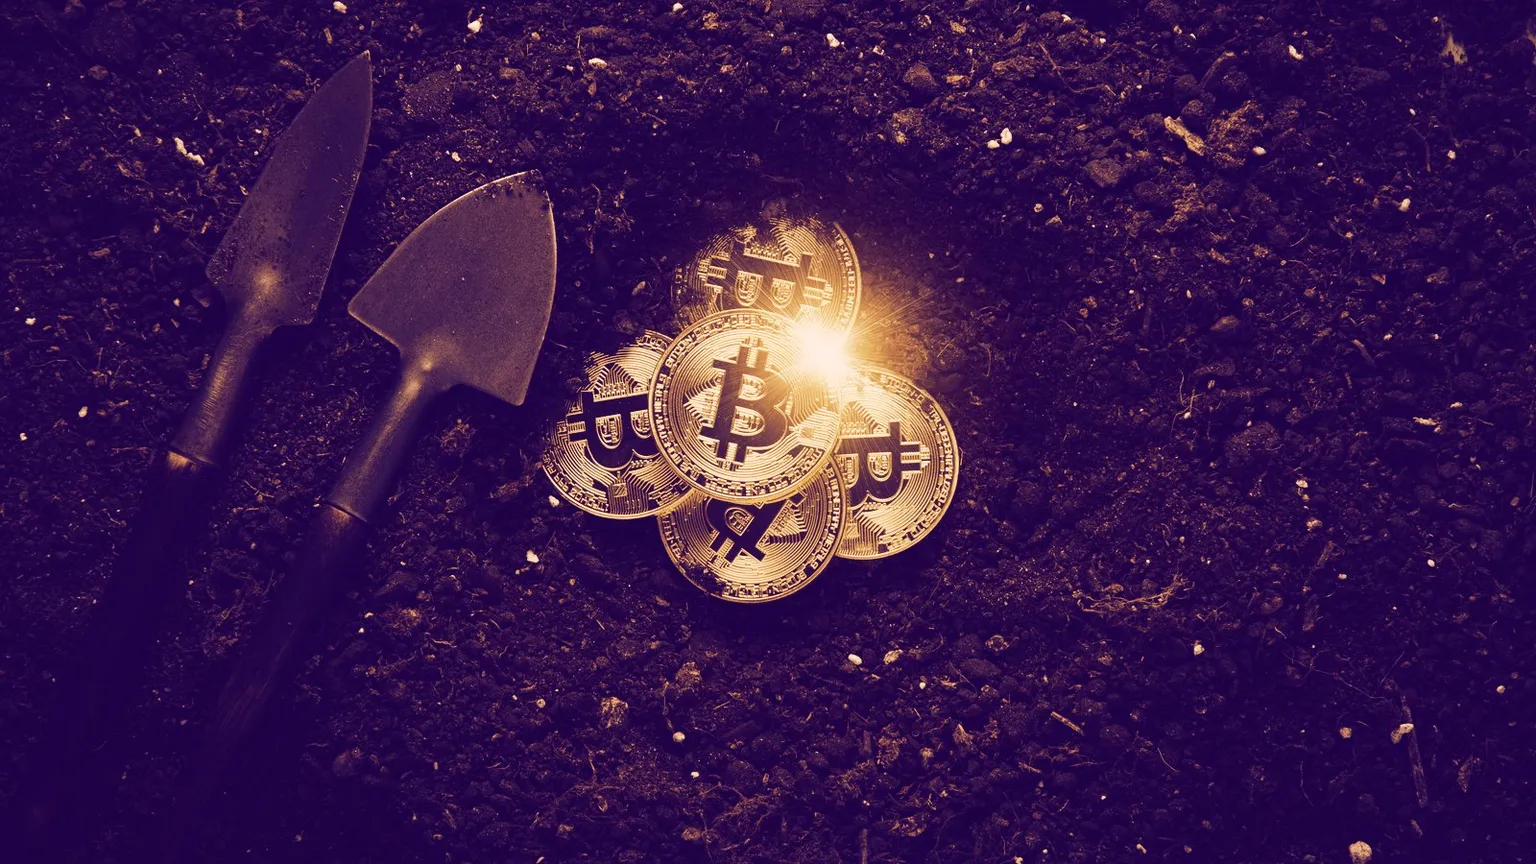 Finding Bitcoin in the ground. Image: Shutterstock